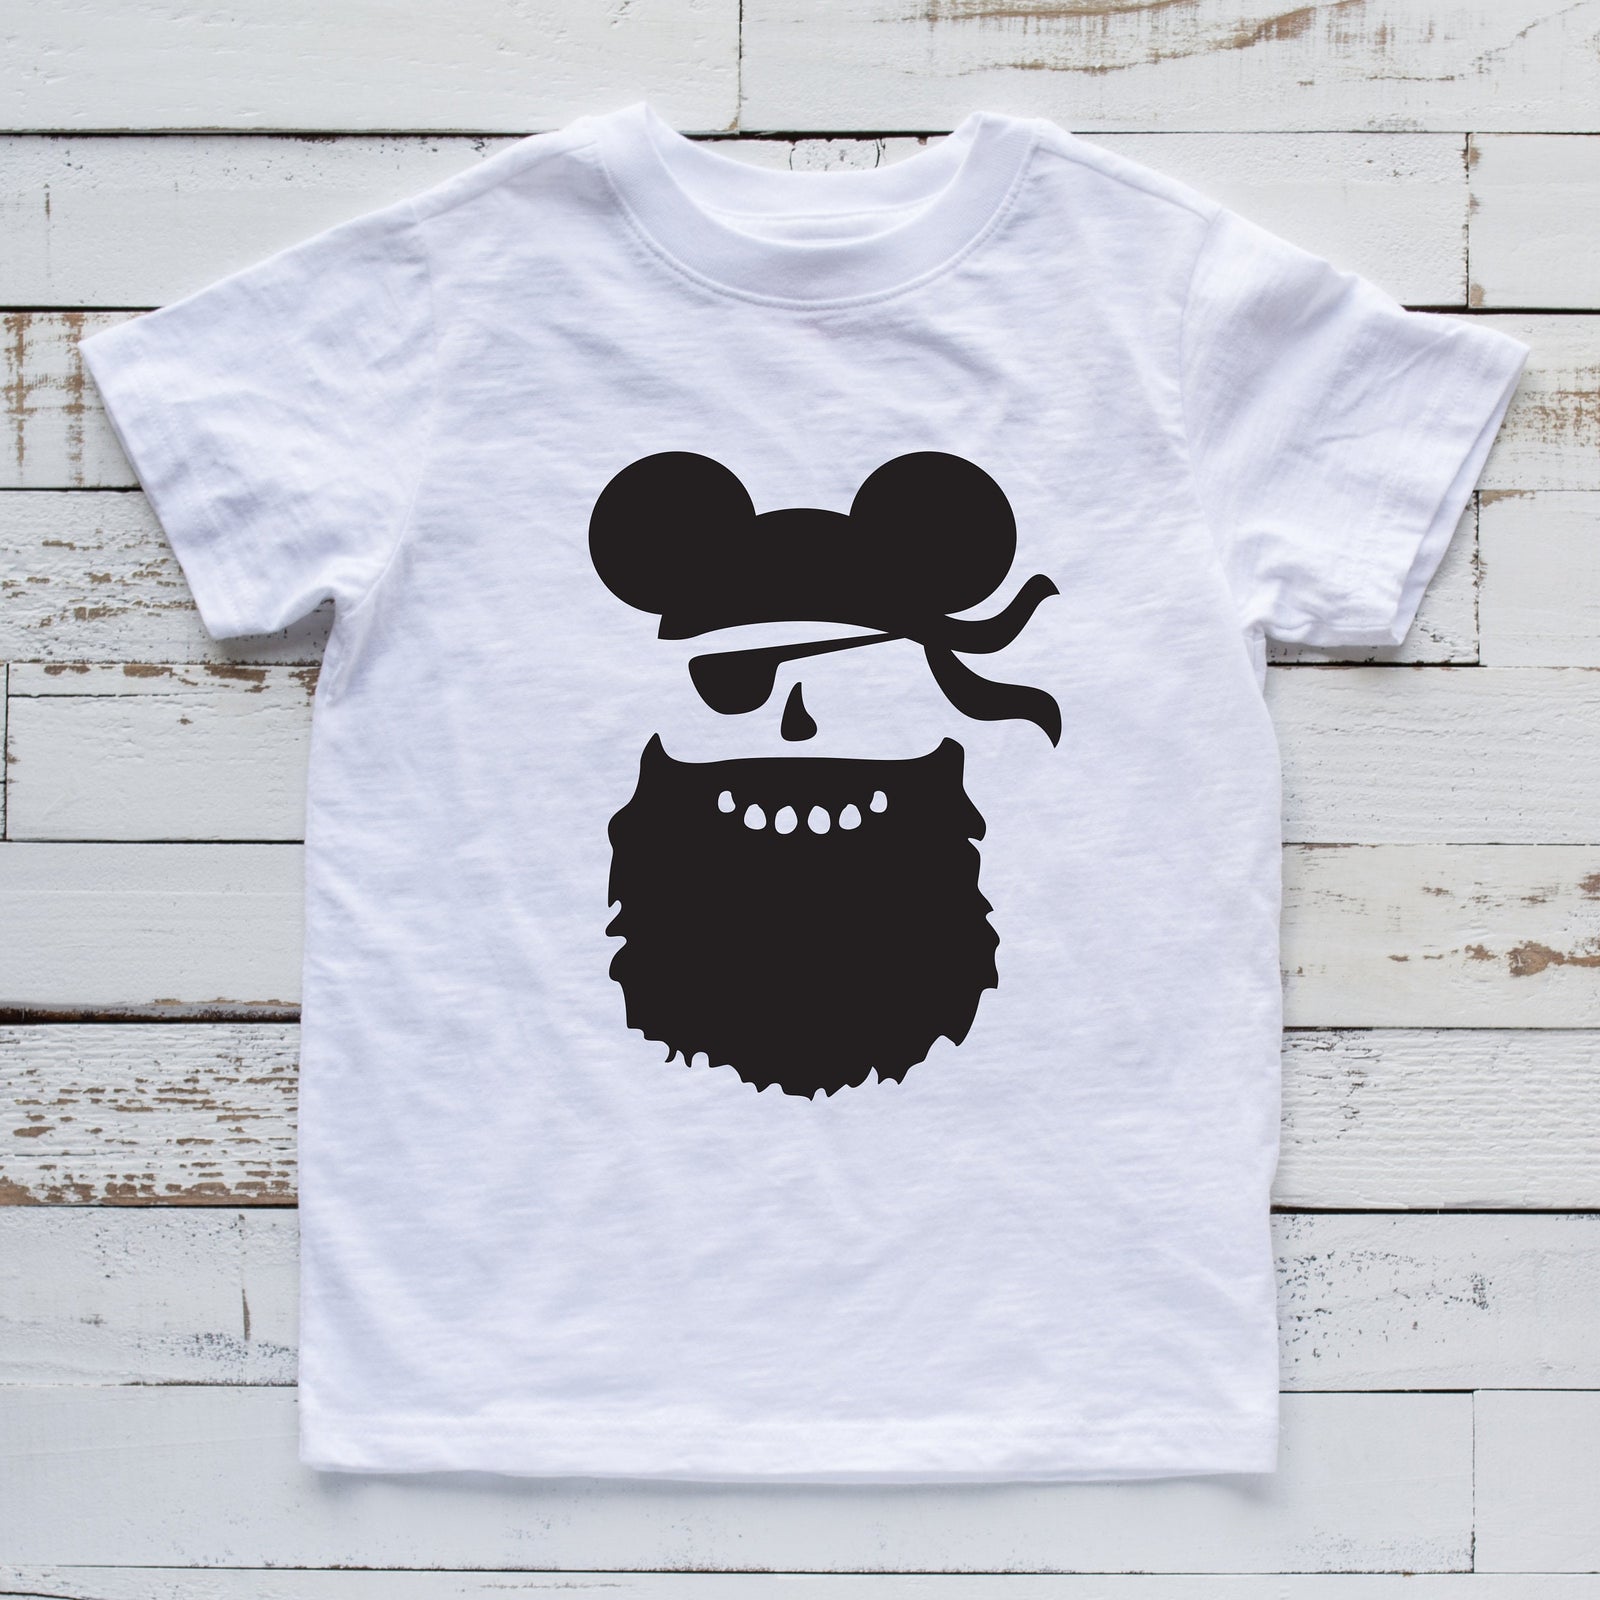 Bearded Pirate Mickey Mouse Disney T shirt - Personalized Disney Matching Family Shirts - Ahoy - Pirate's Life Skull